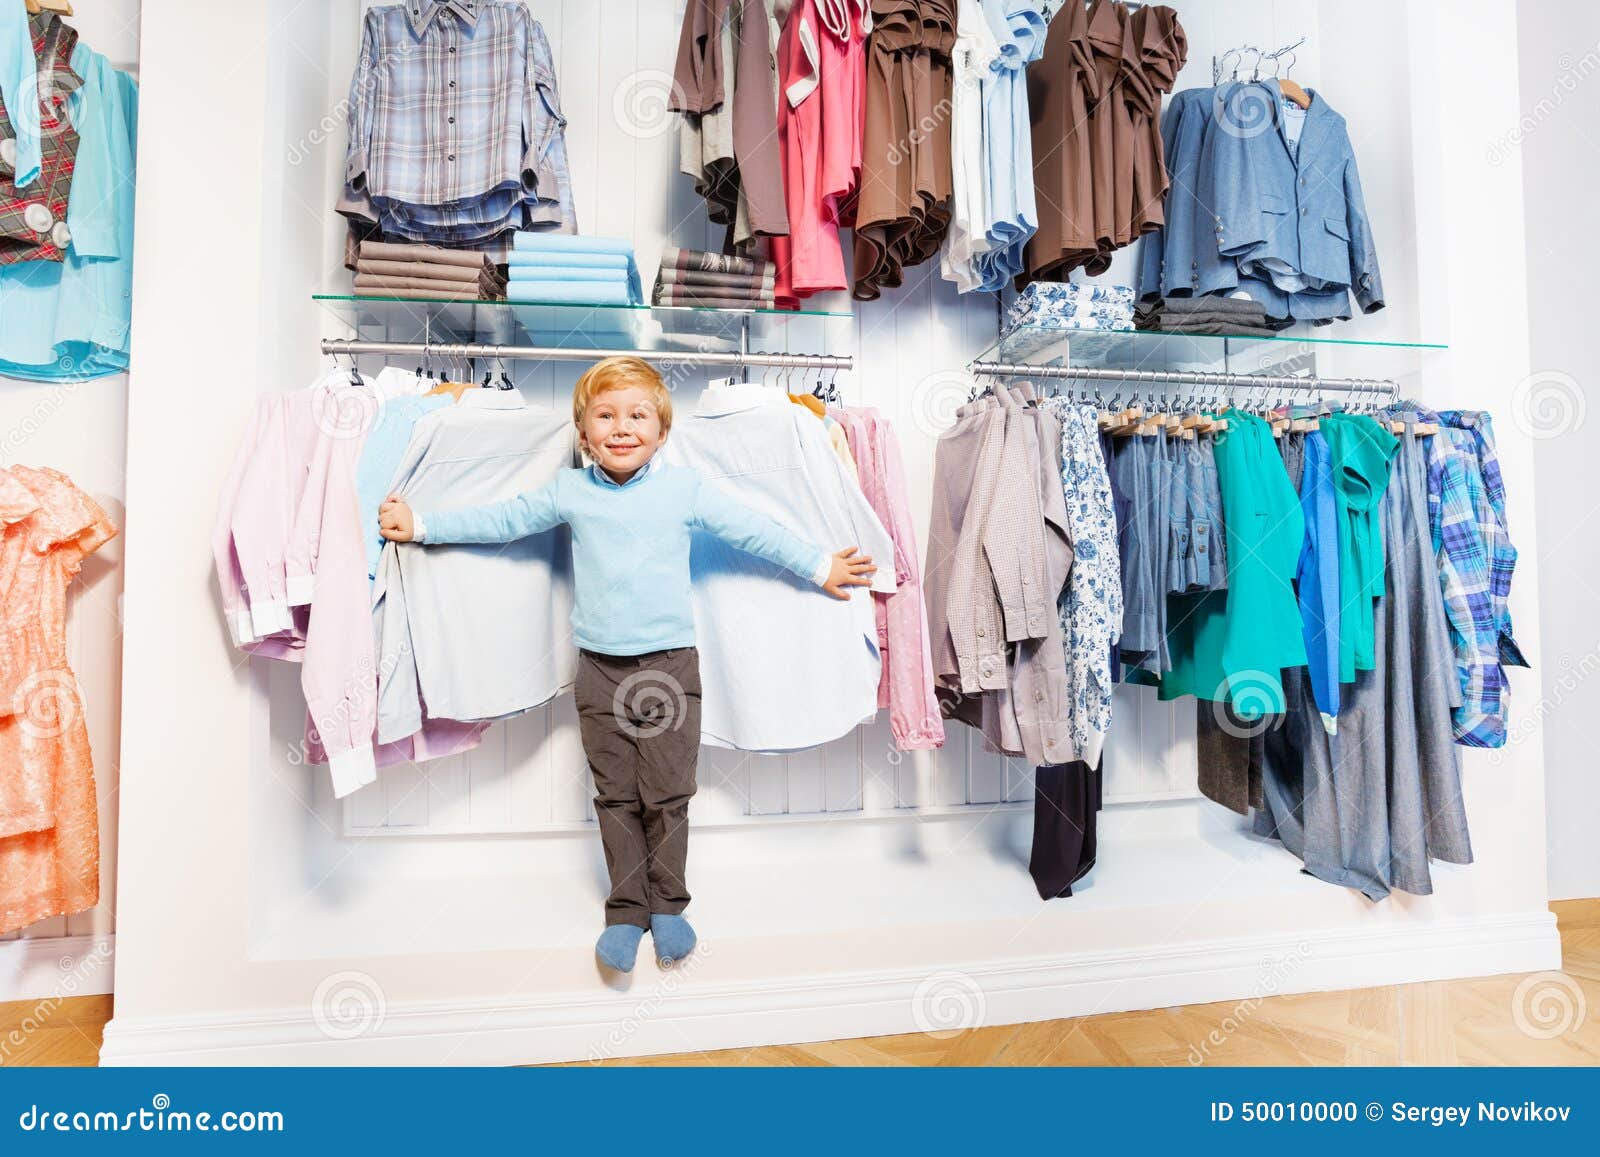 Cute Boy Stands among Clothes on Hangers and Shelf Stock Photo - Image ...